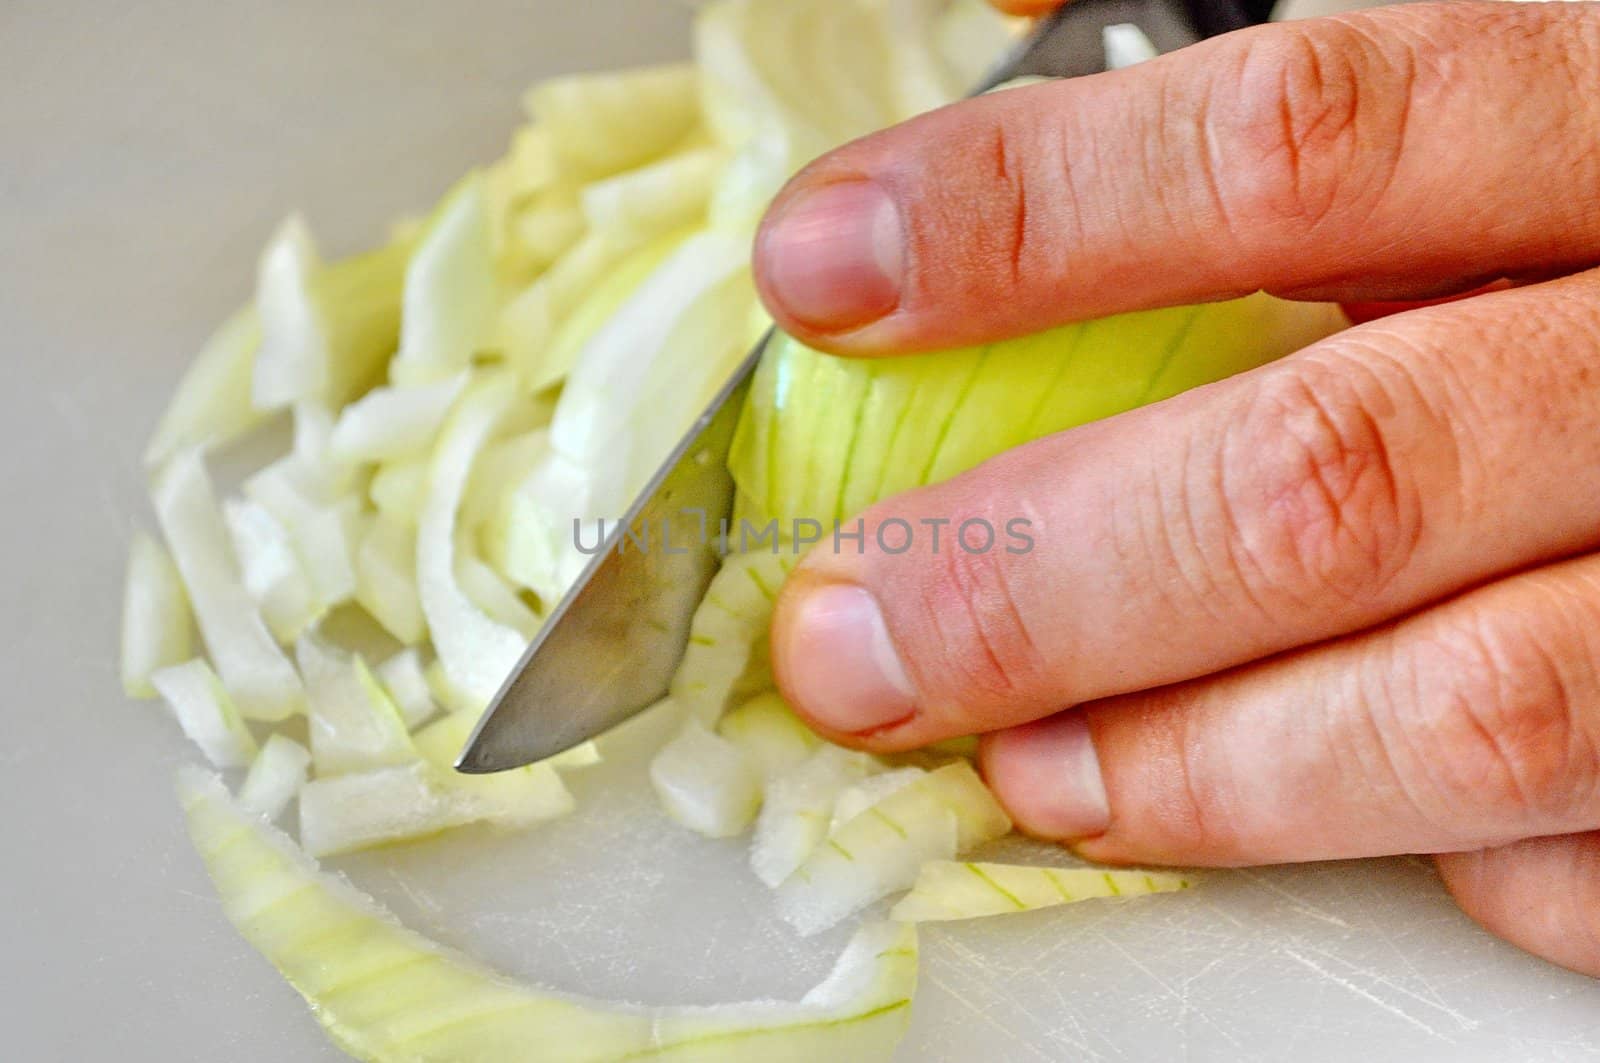 Slicing an onion by anderm